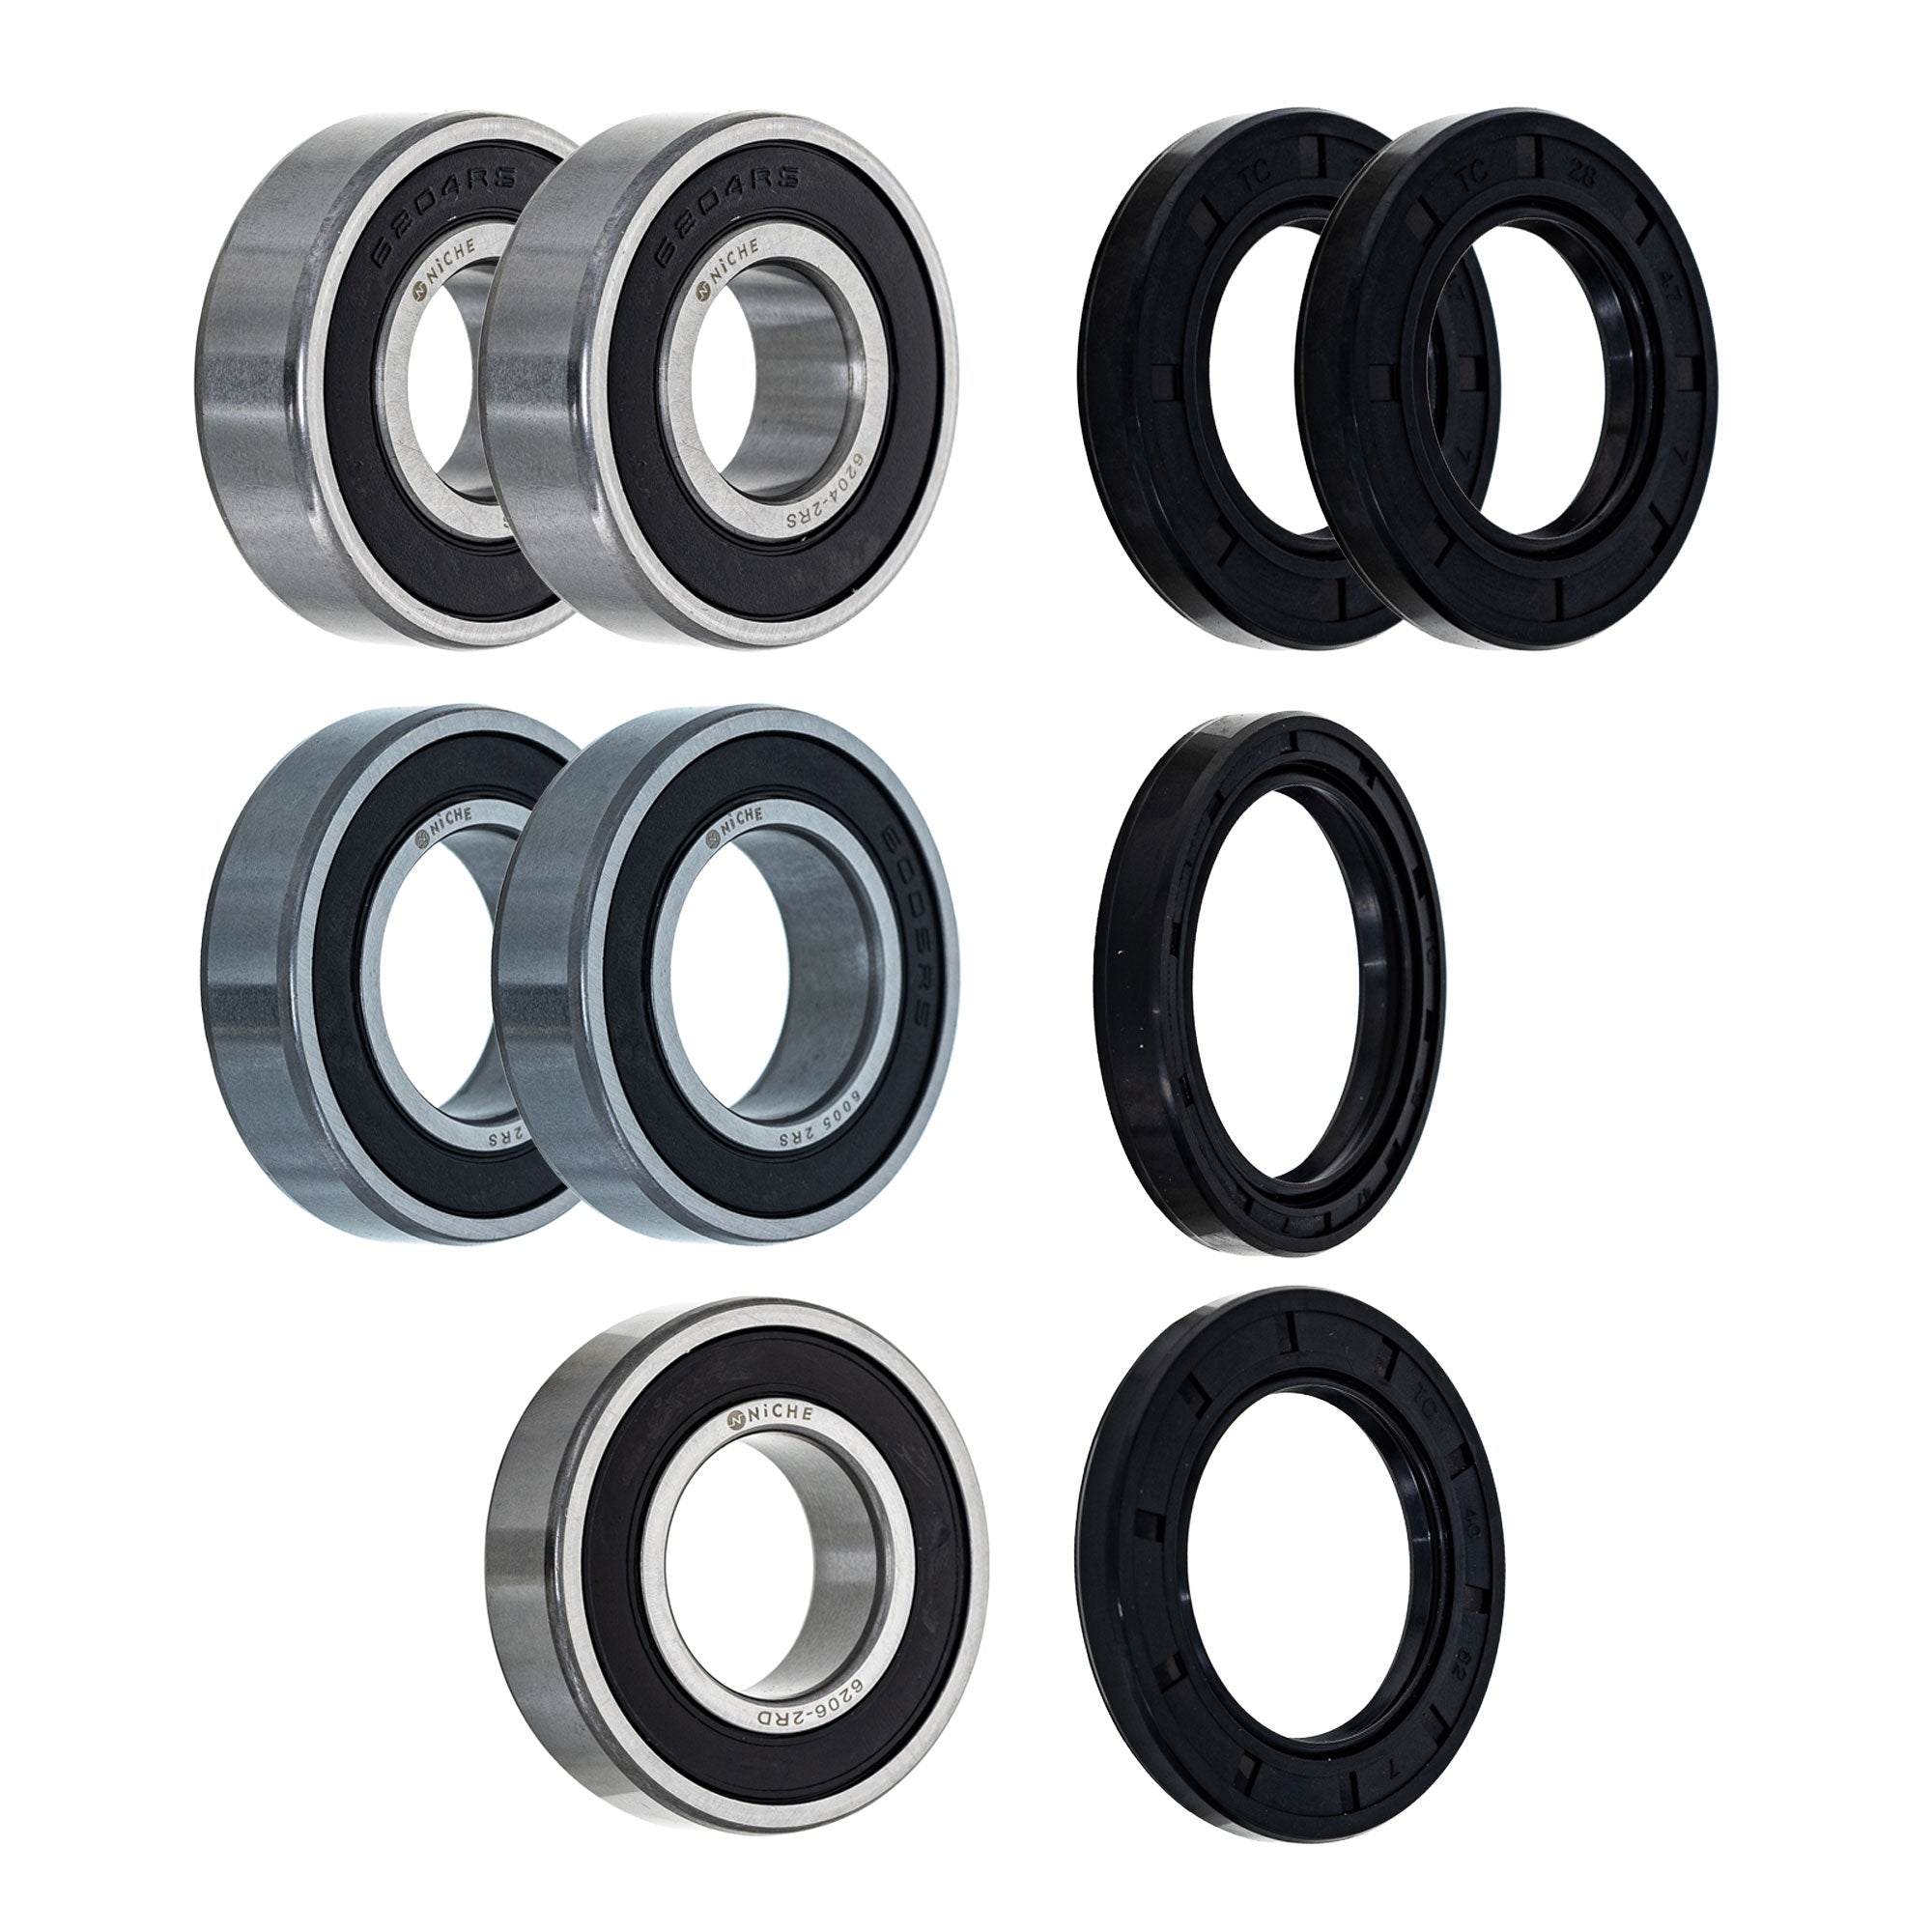 Wheel Bearing Seal Kit for zOTHER Ref No Tiger NICHE MK1008623